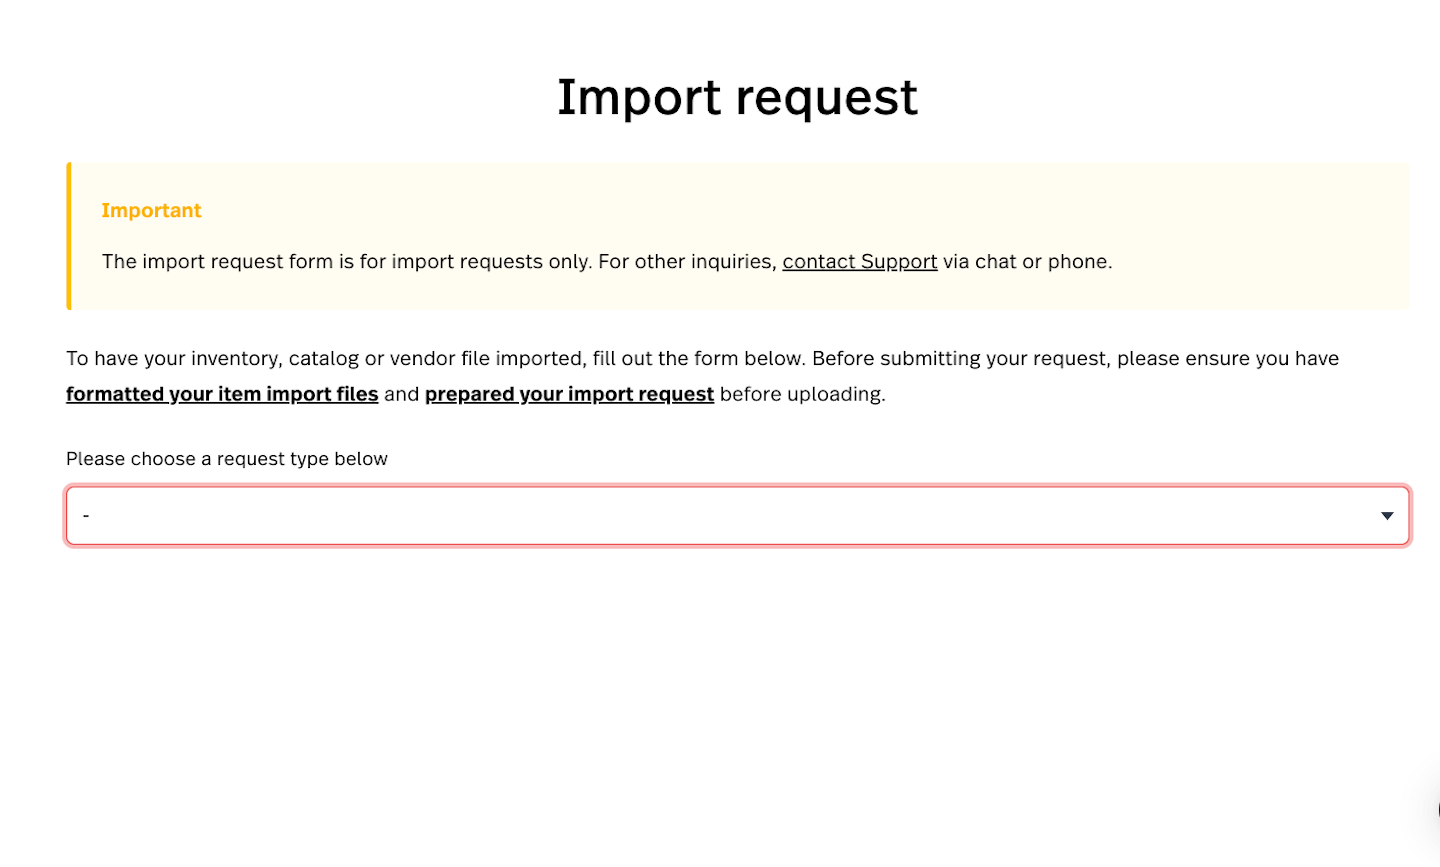 Lightspeed import request form with drop-down to select import type.